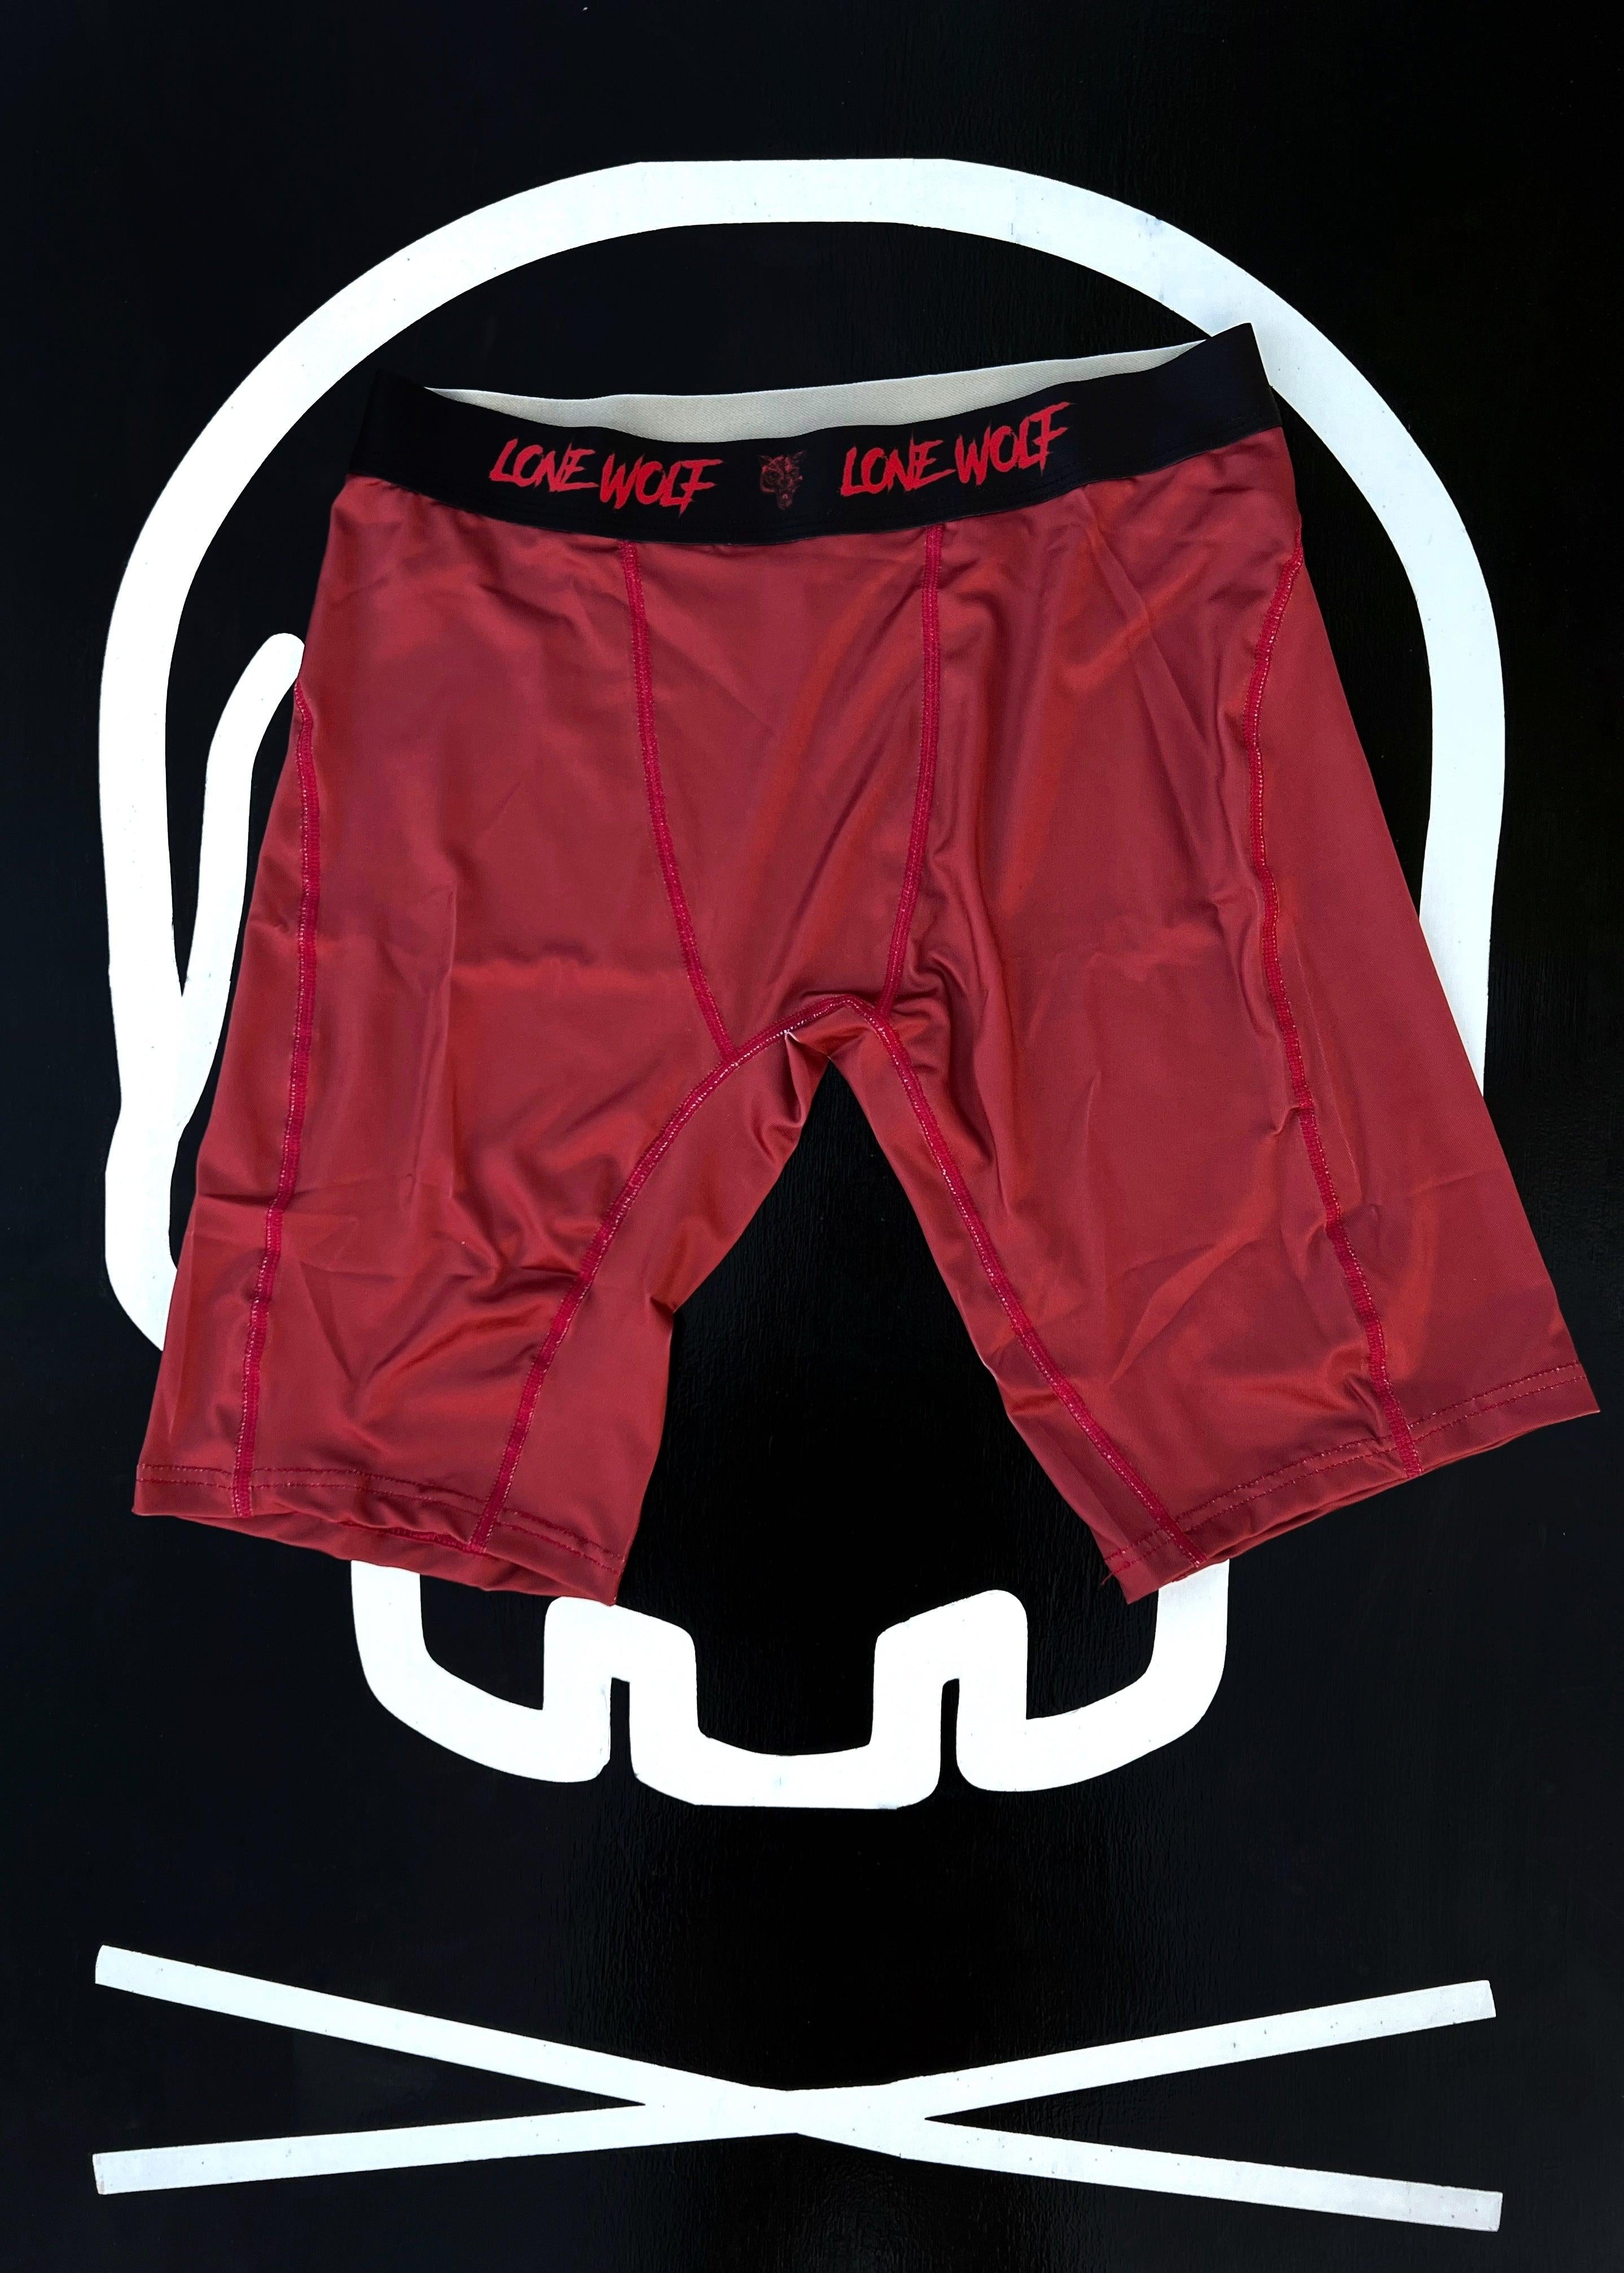 LONE WOLF BOXER BRIEF SET - The Drive Clothing